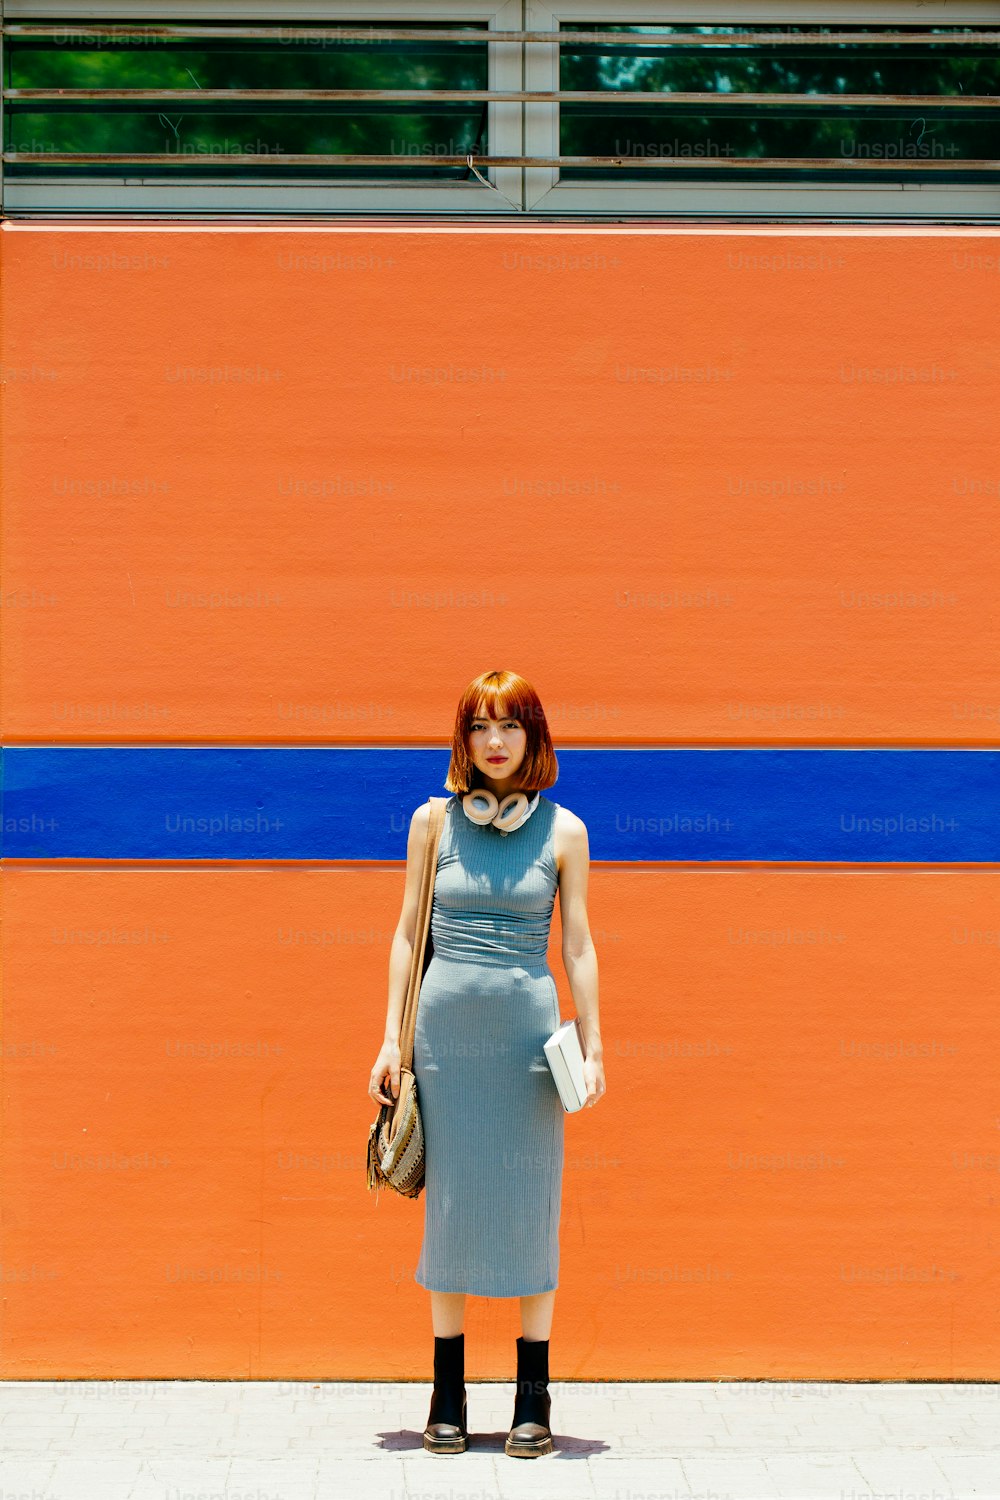 a woman standing in front of an orange and blue wall